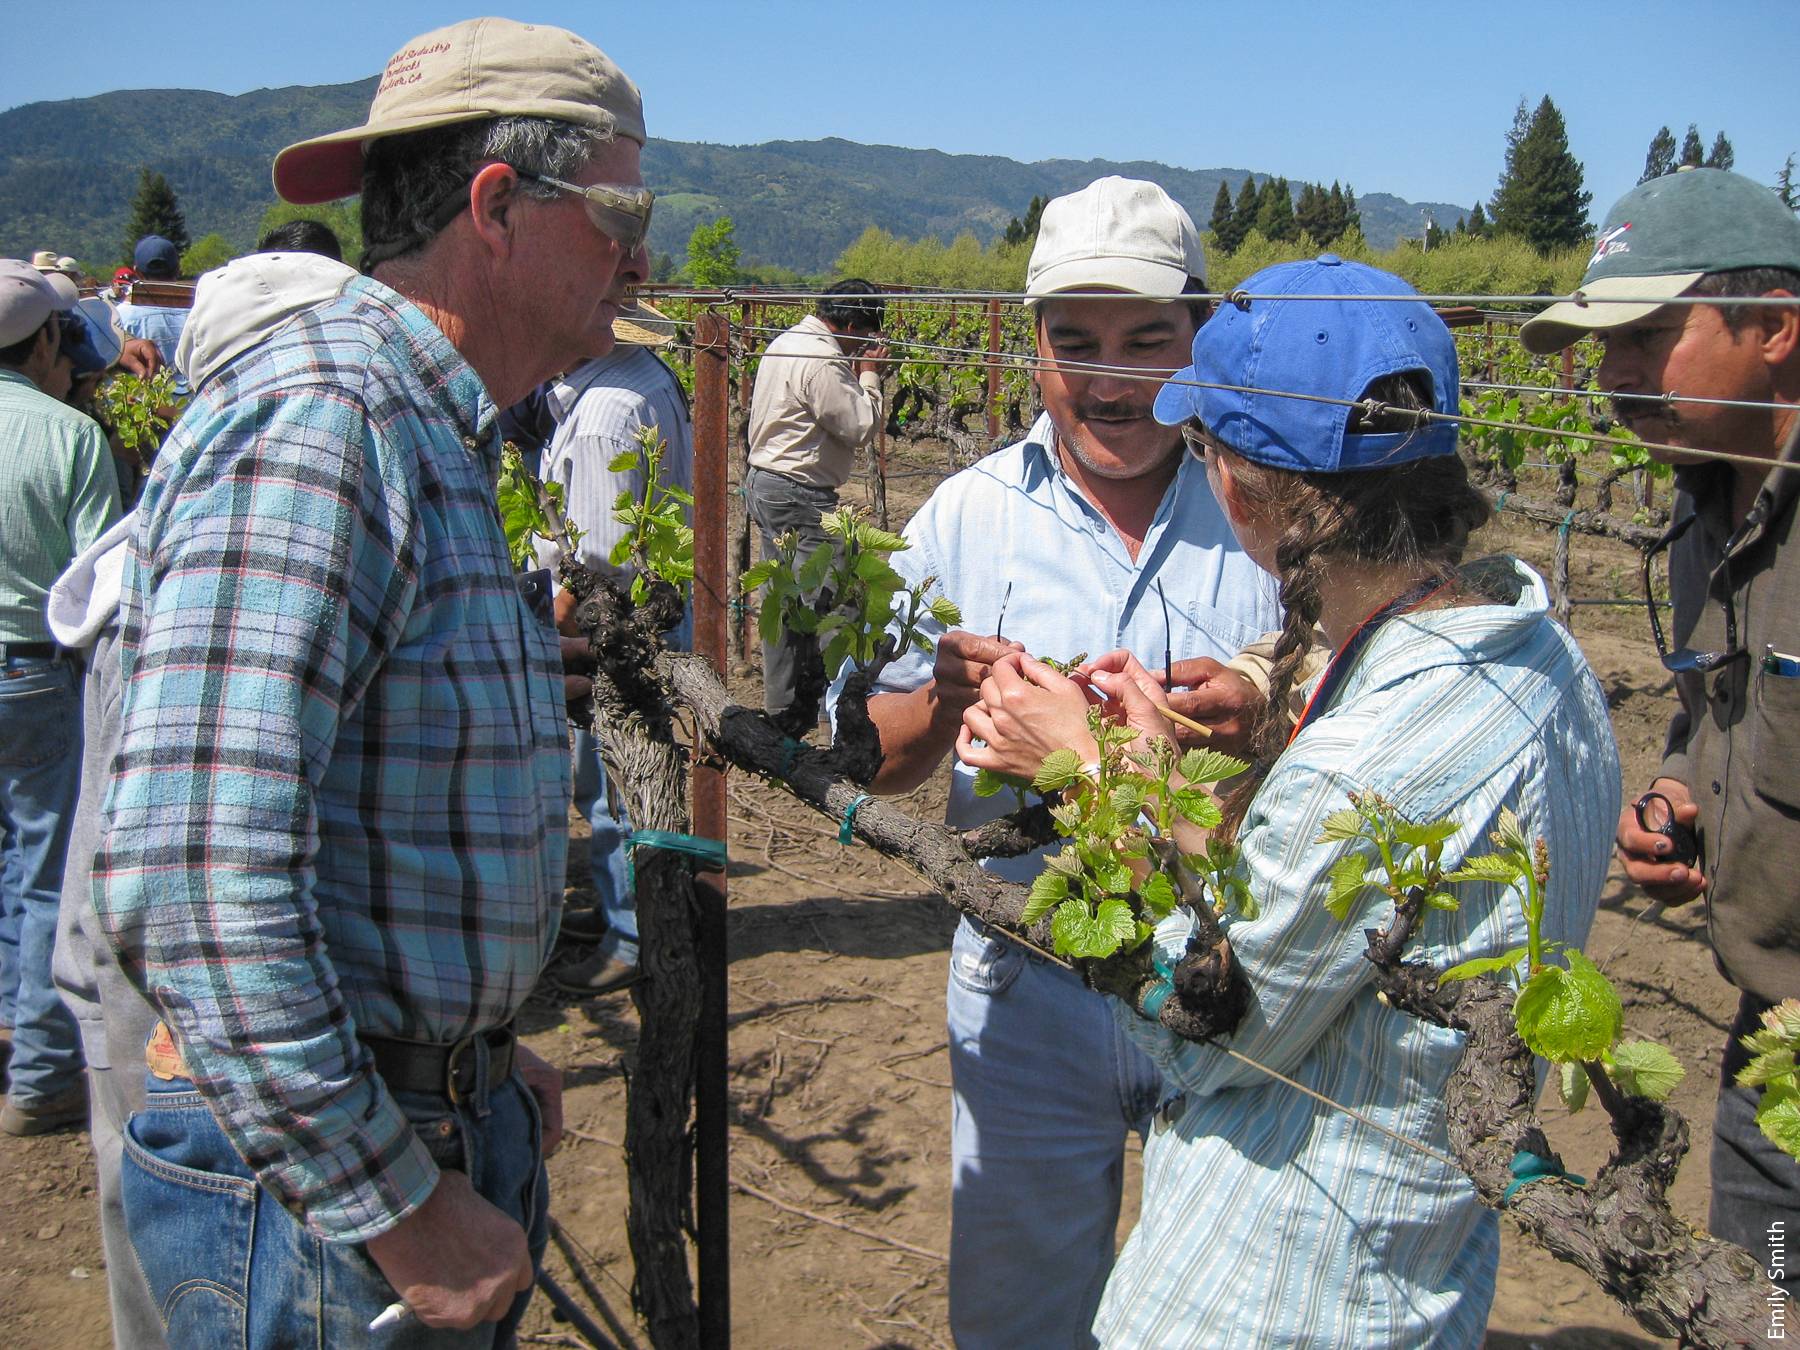 Field day training sessions with growers and farmworkers were held in Oakville, CA, in April 2010.